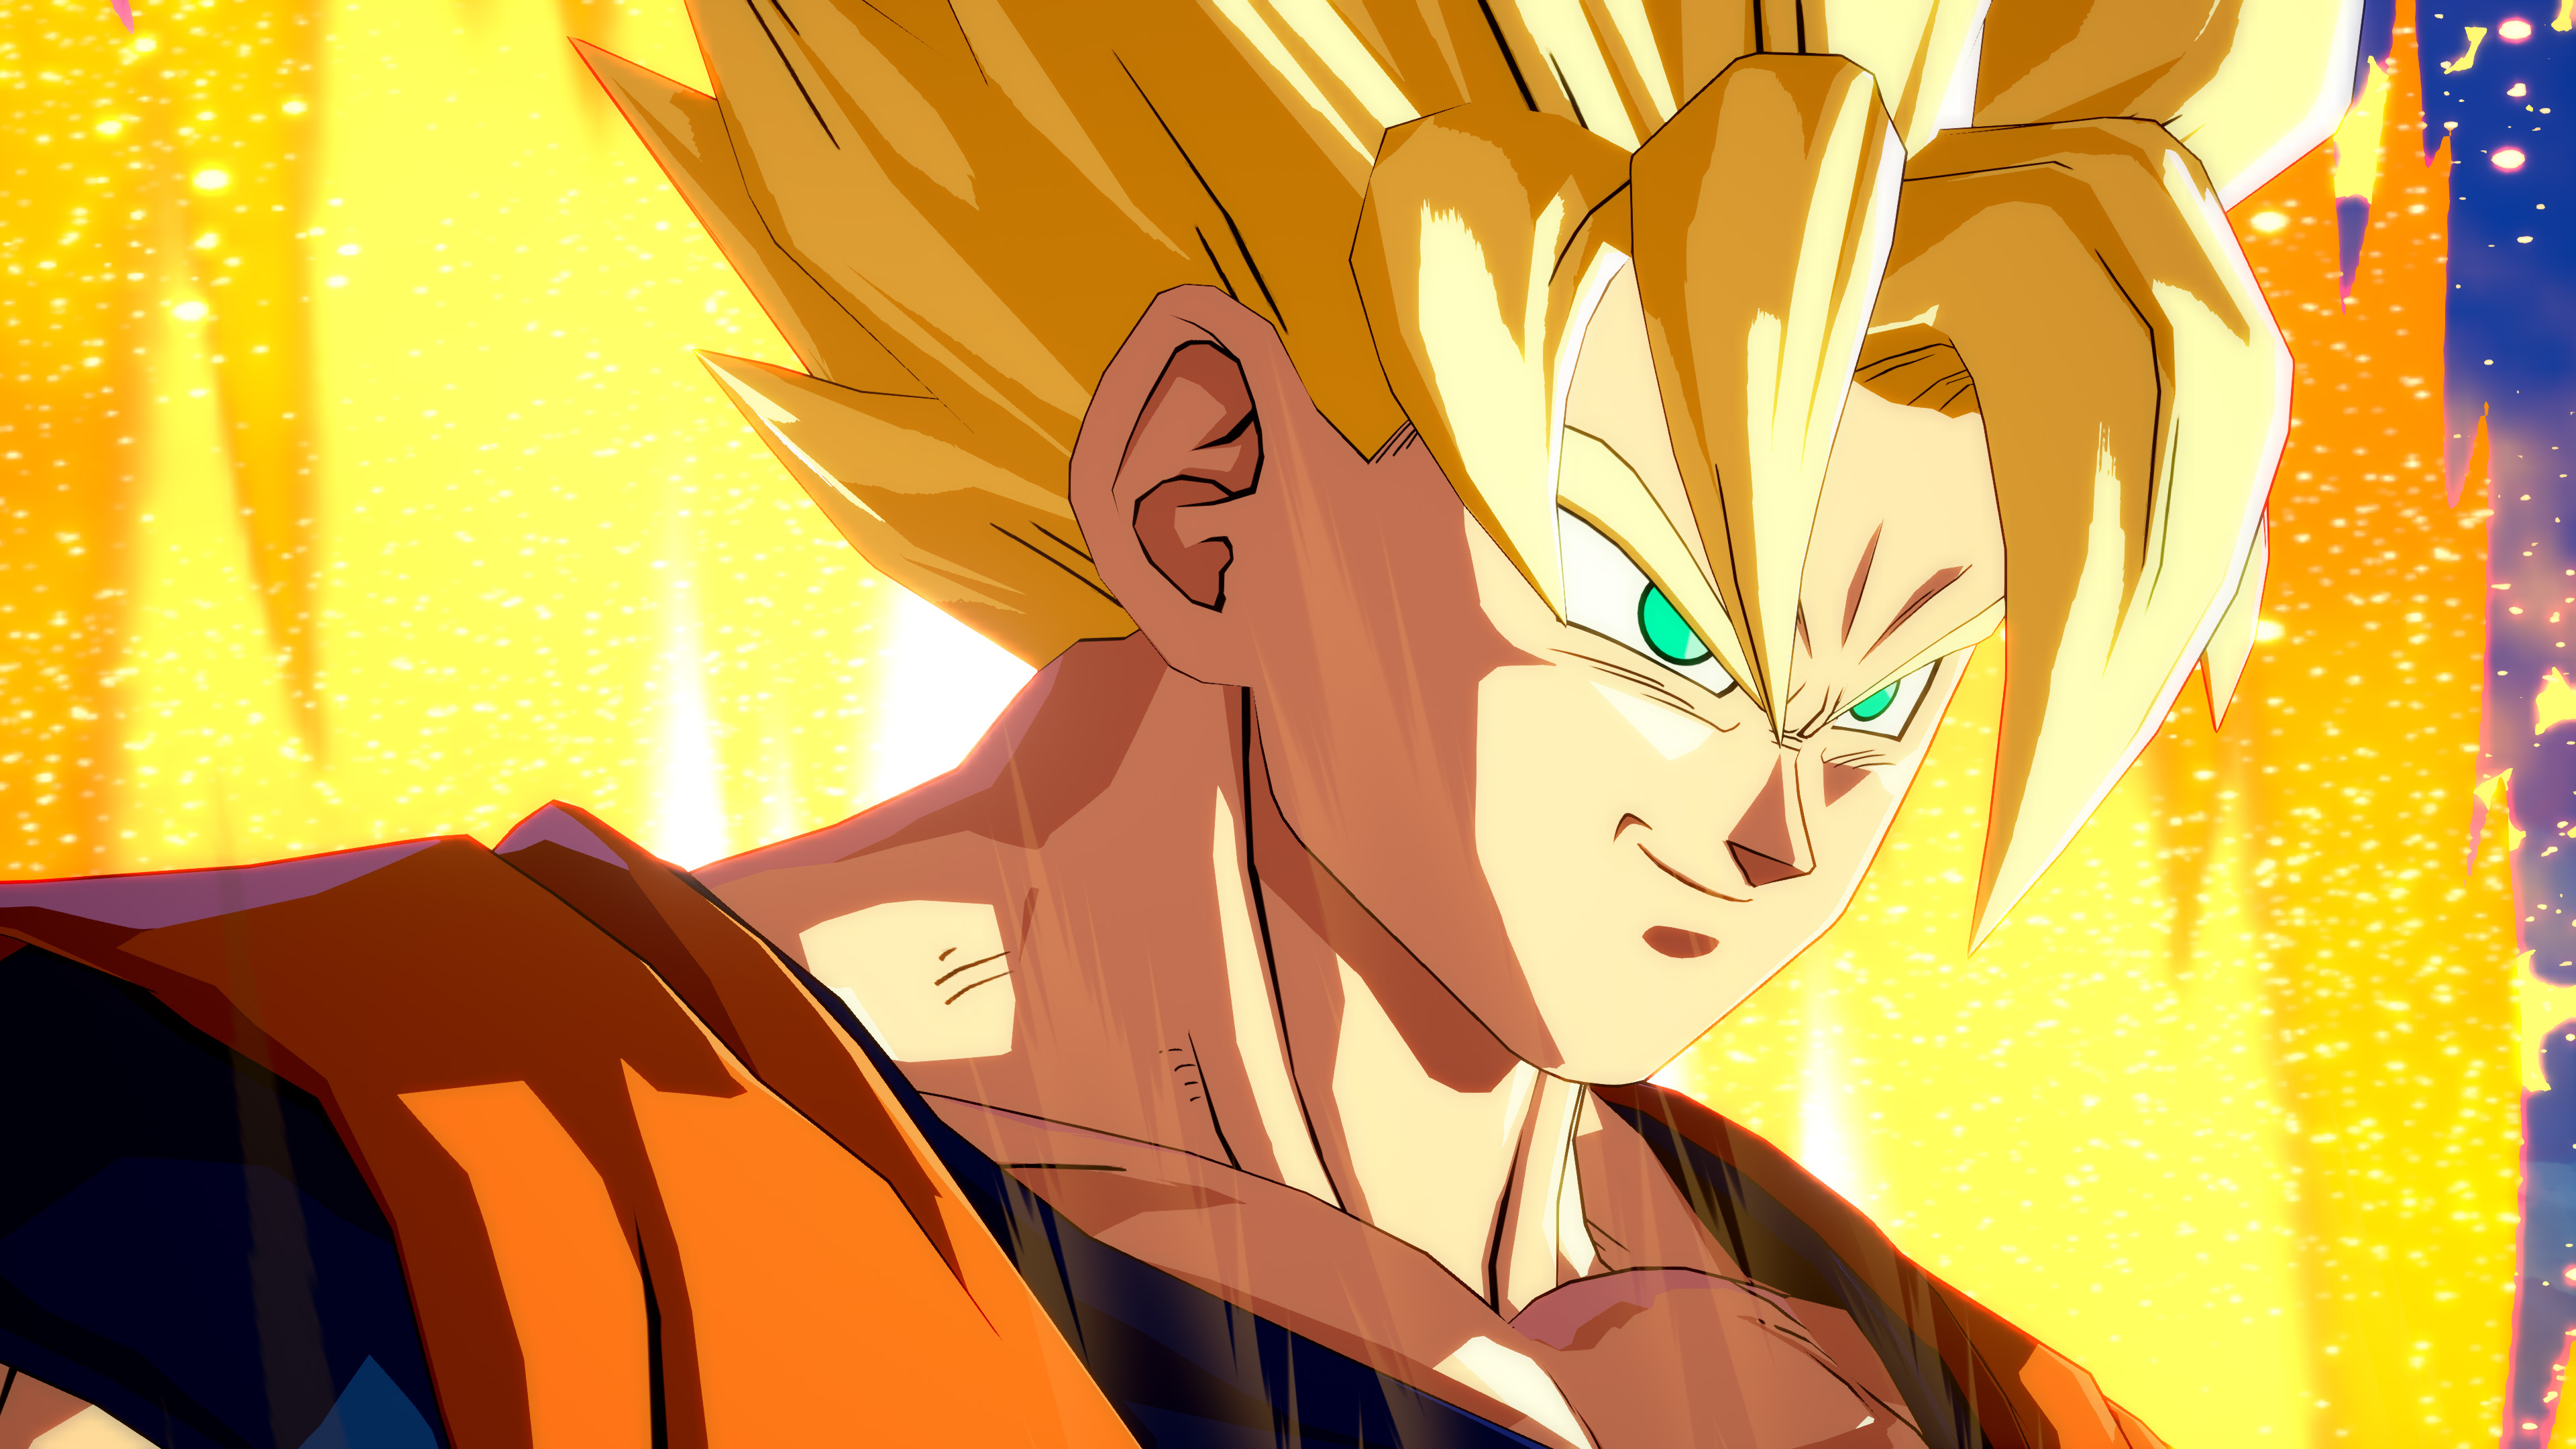 2048x2048 Dragon Ball Fighter Z 4k Ipad Air Hd 4k Wallpapers Images